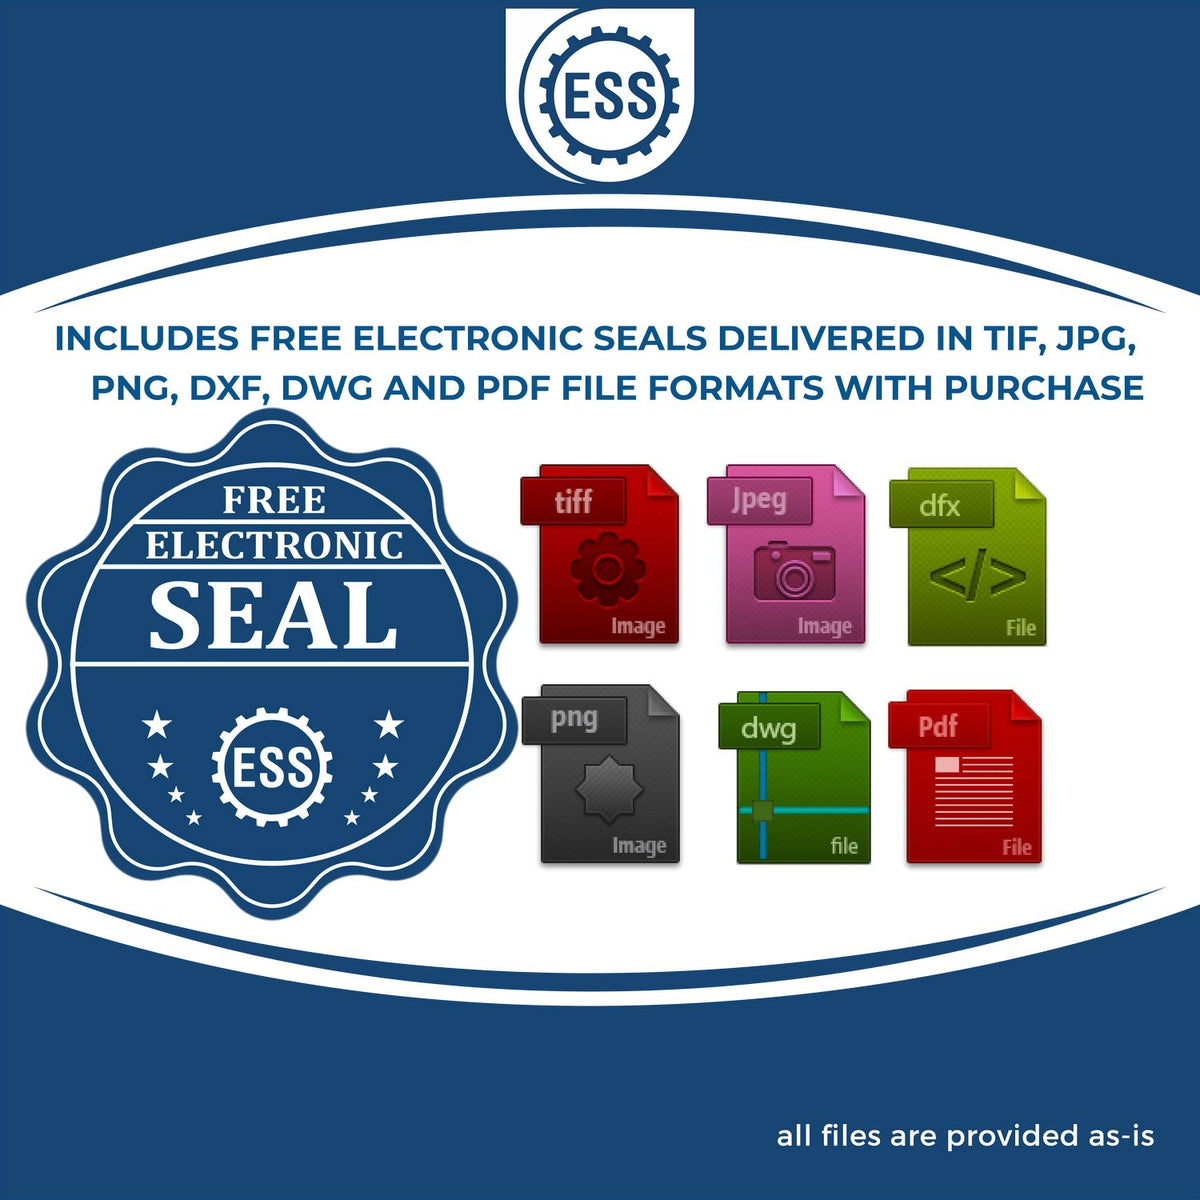 An infographic for the free electronic seal for the Gift Minnesota Land Surveyor Seal illustrating the different file type icons such as DXF, DWG, TIF, JPG and PNG.